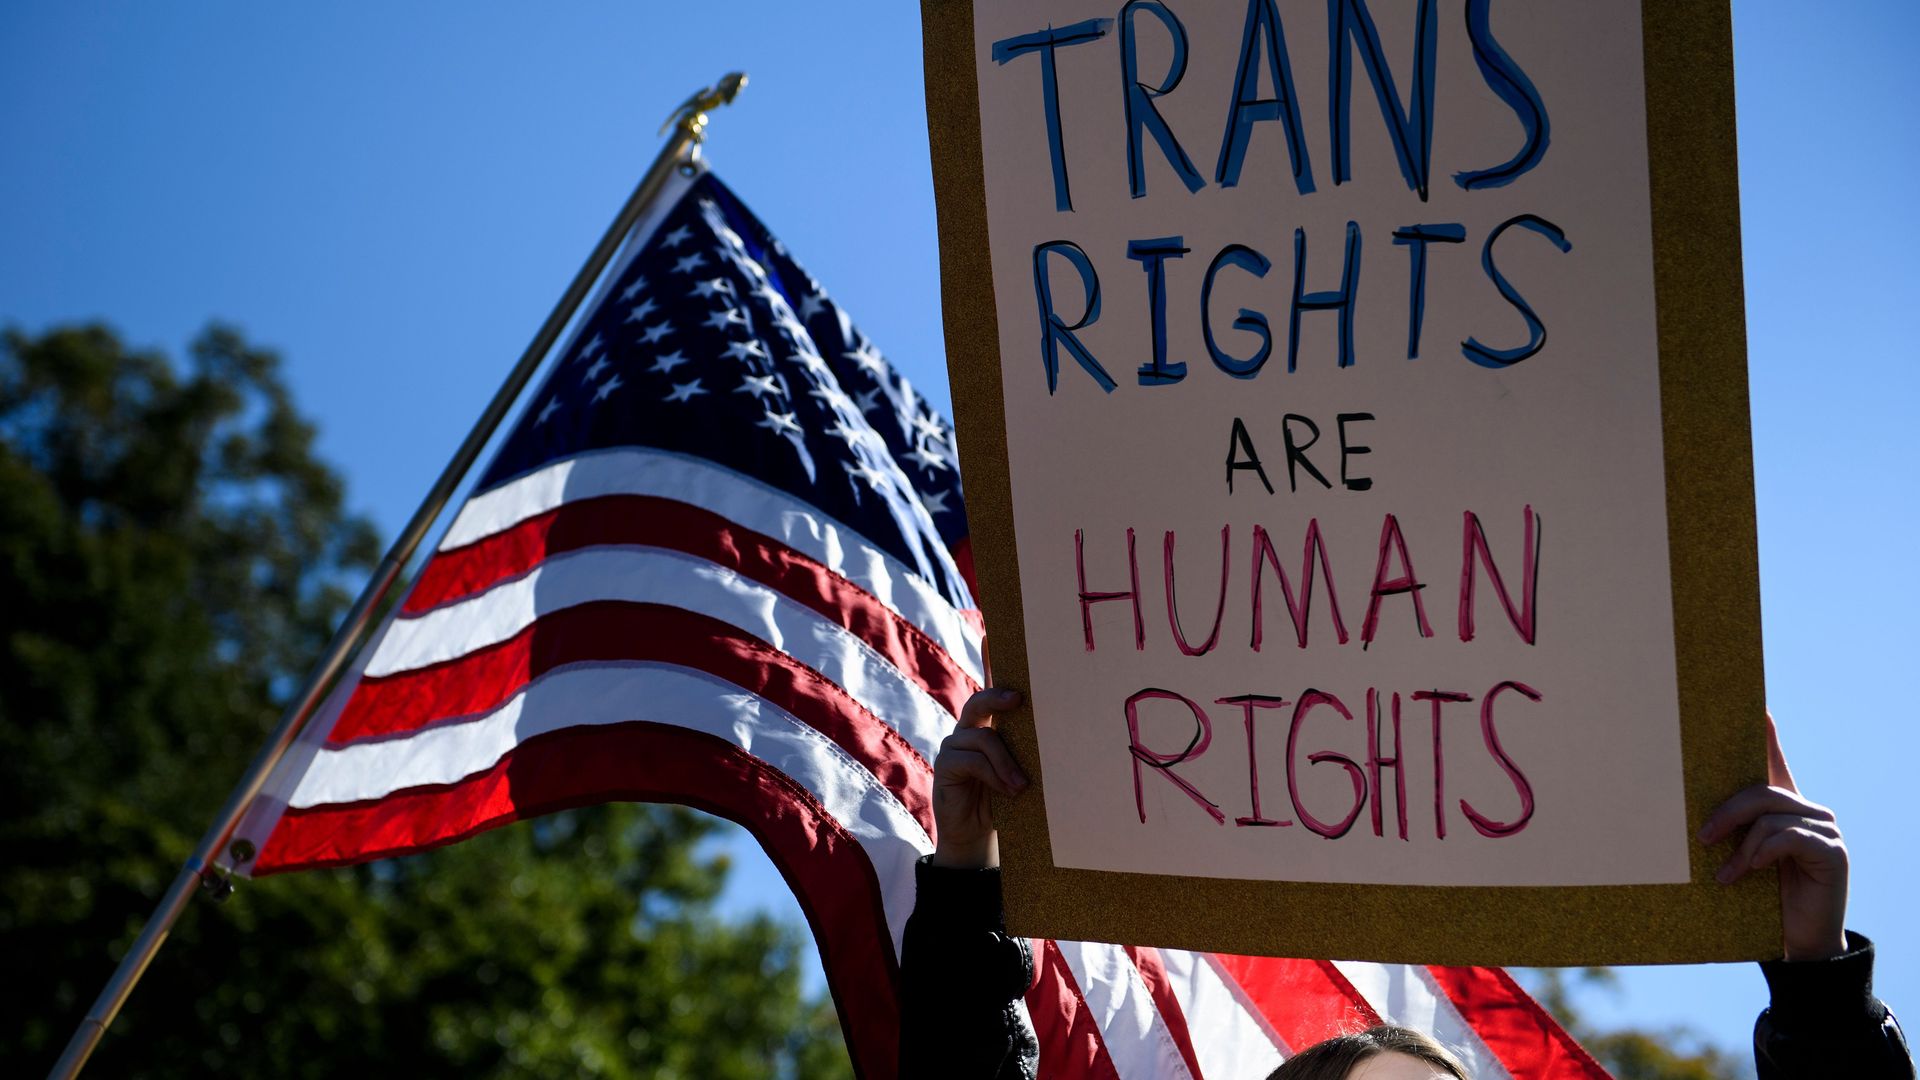 Trans rights signs